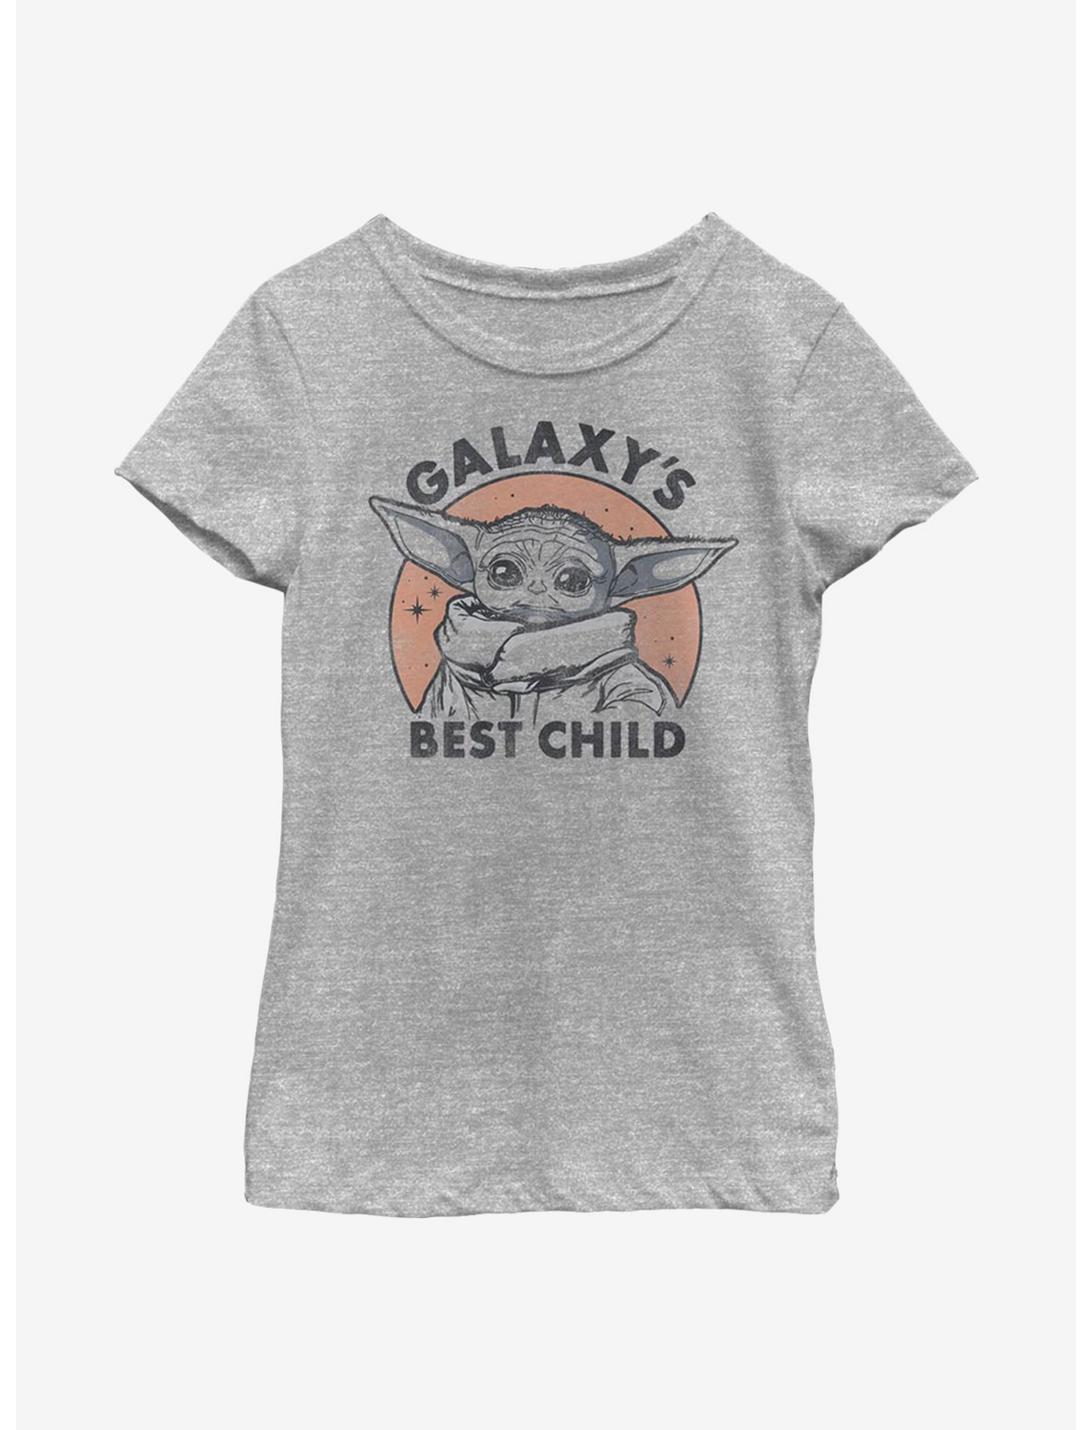 Star Wars The Mandalorian Galaxy's Best Child Youth Girls T-Shirt, ATH HTR, hi-res